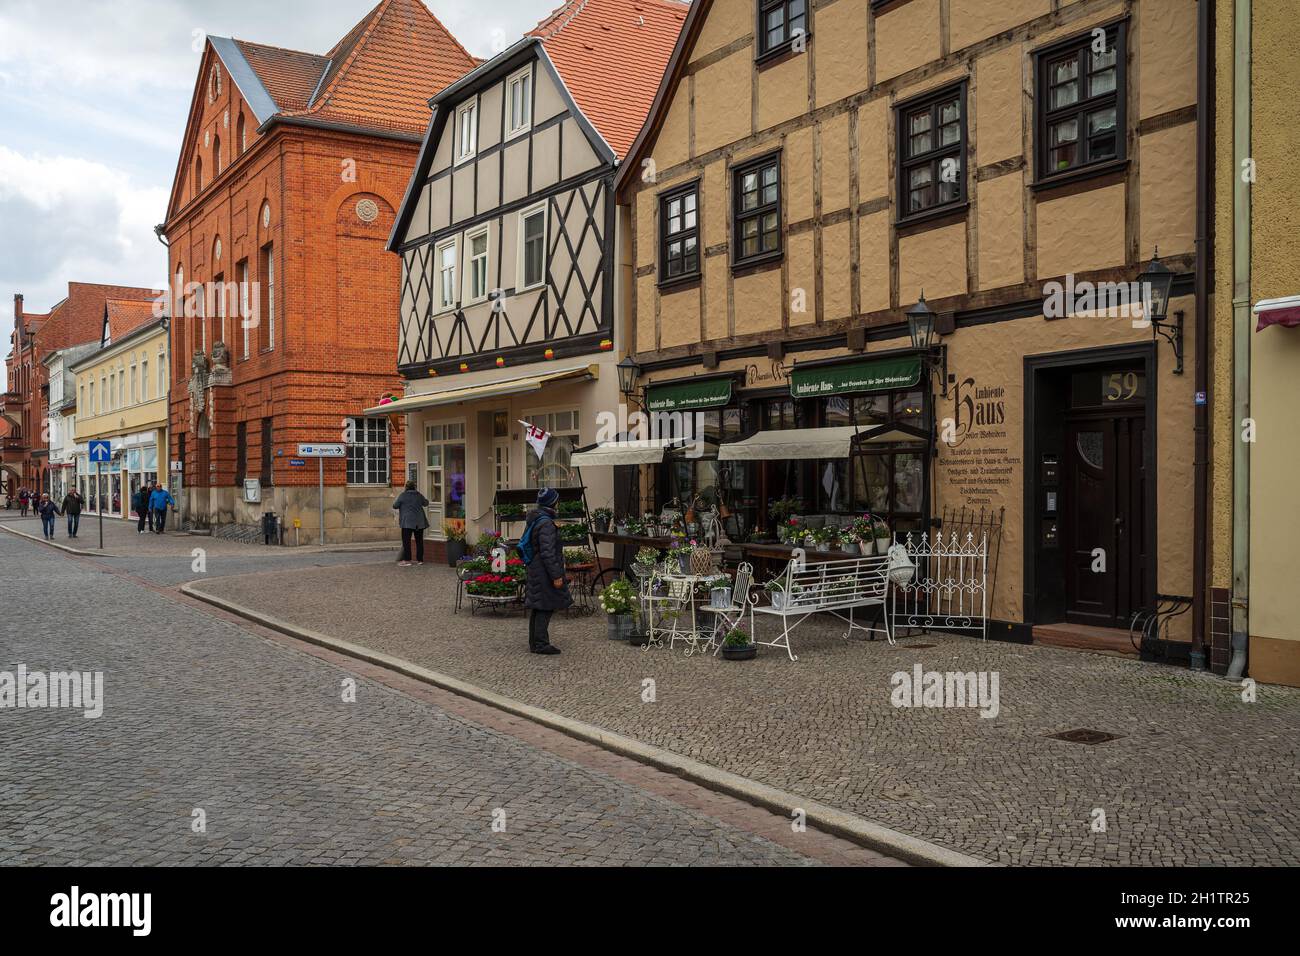 TANGERMUENDE, GERMANY - APRIL 24, 2021: Flower shop on old street of a historic town of Tangermuende. Saxony-Anhalt state. Stock Photo